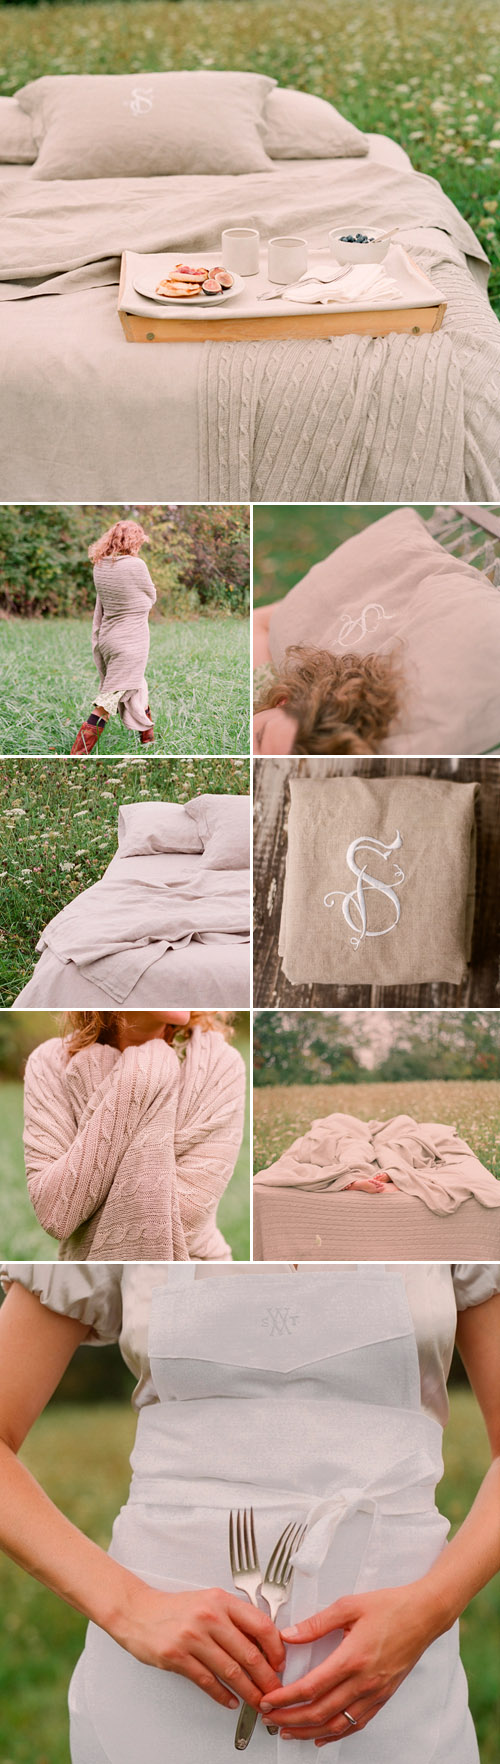 monogrammed bed linens and home accessories from Sarah Drake, images by Elizabeth Messina